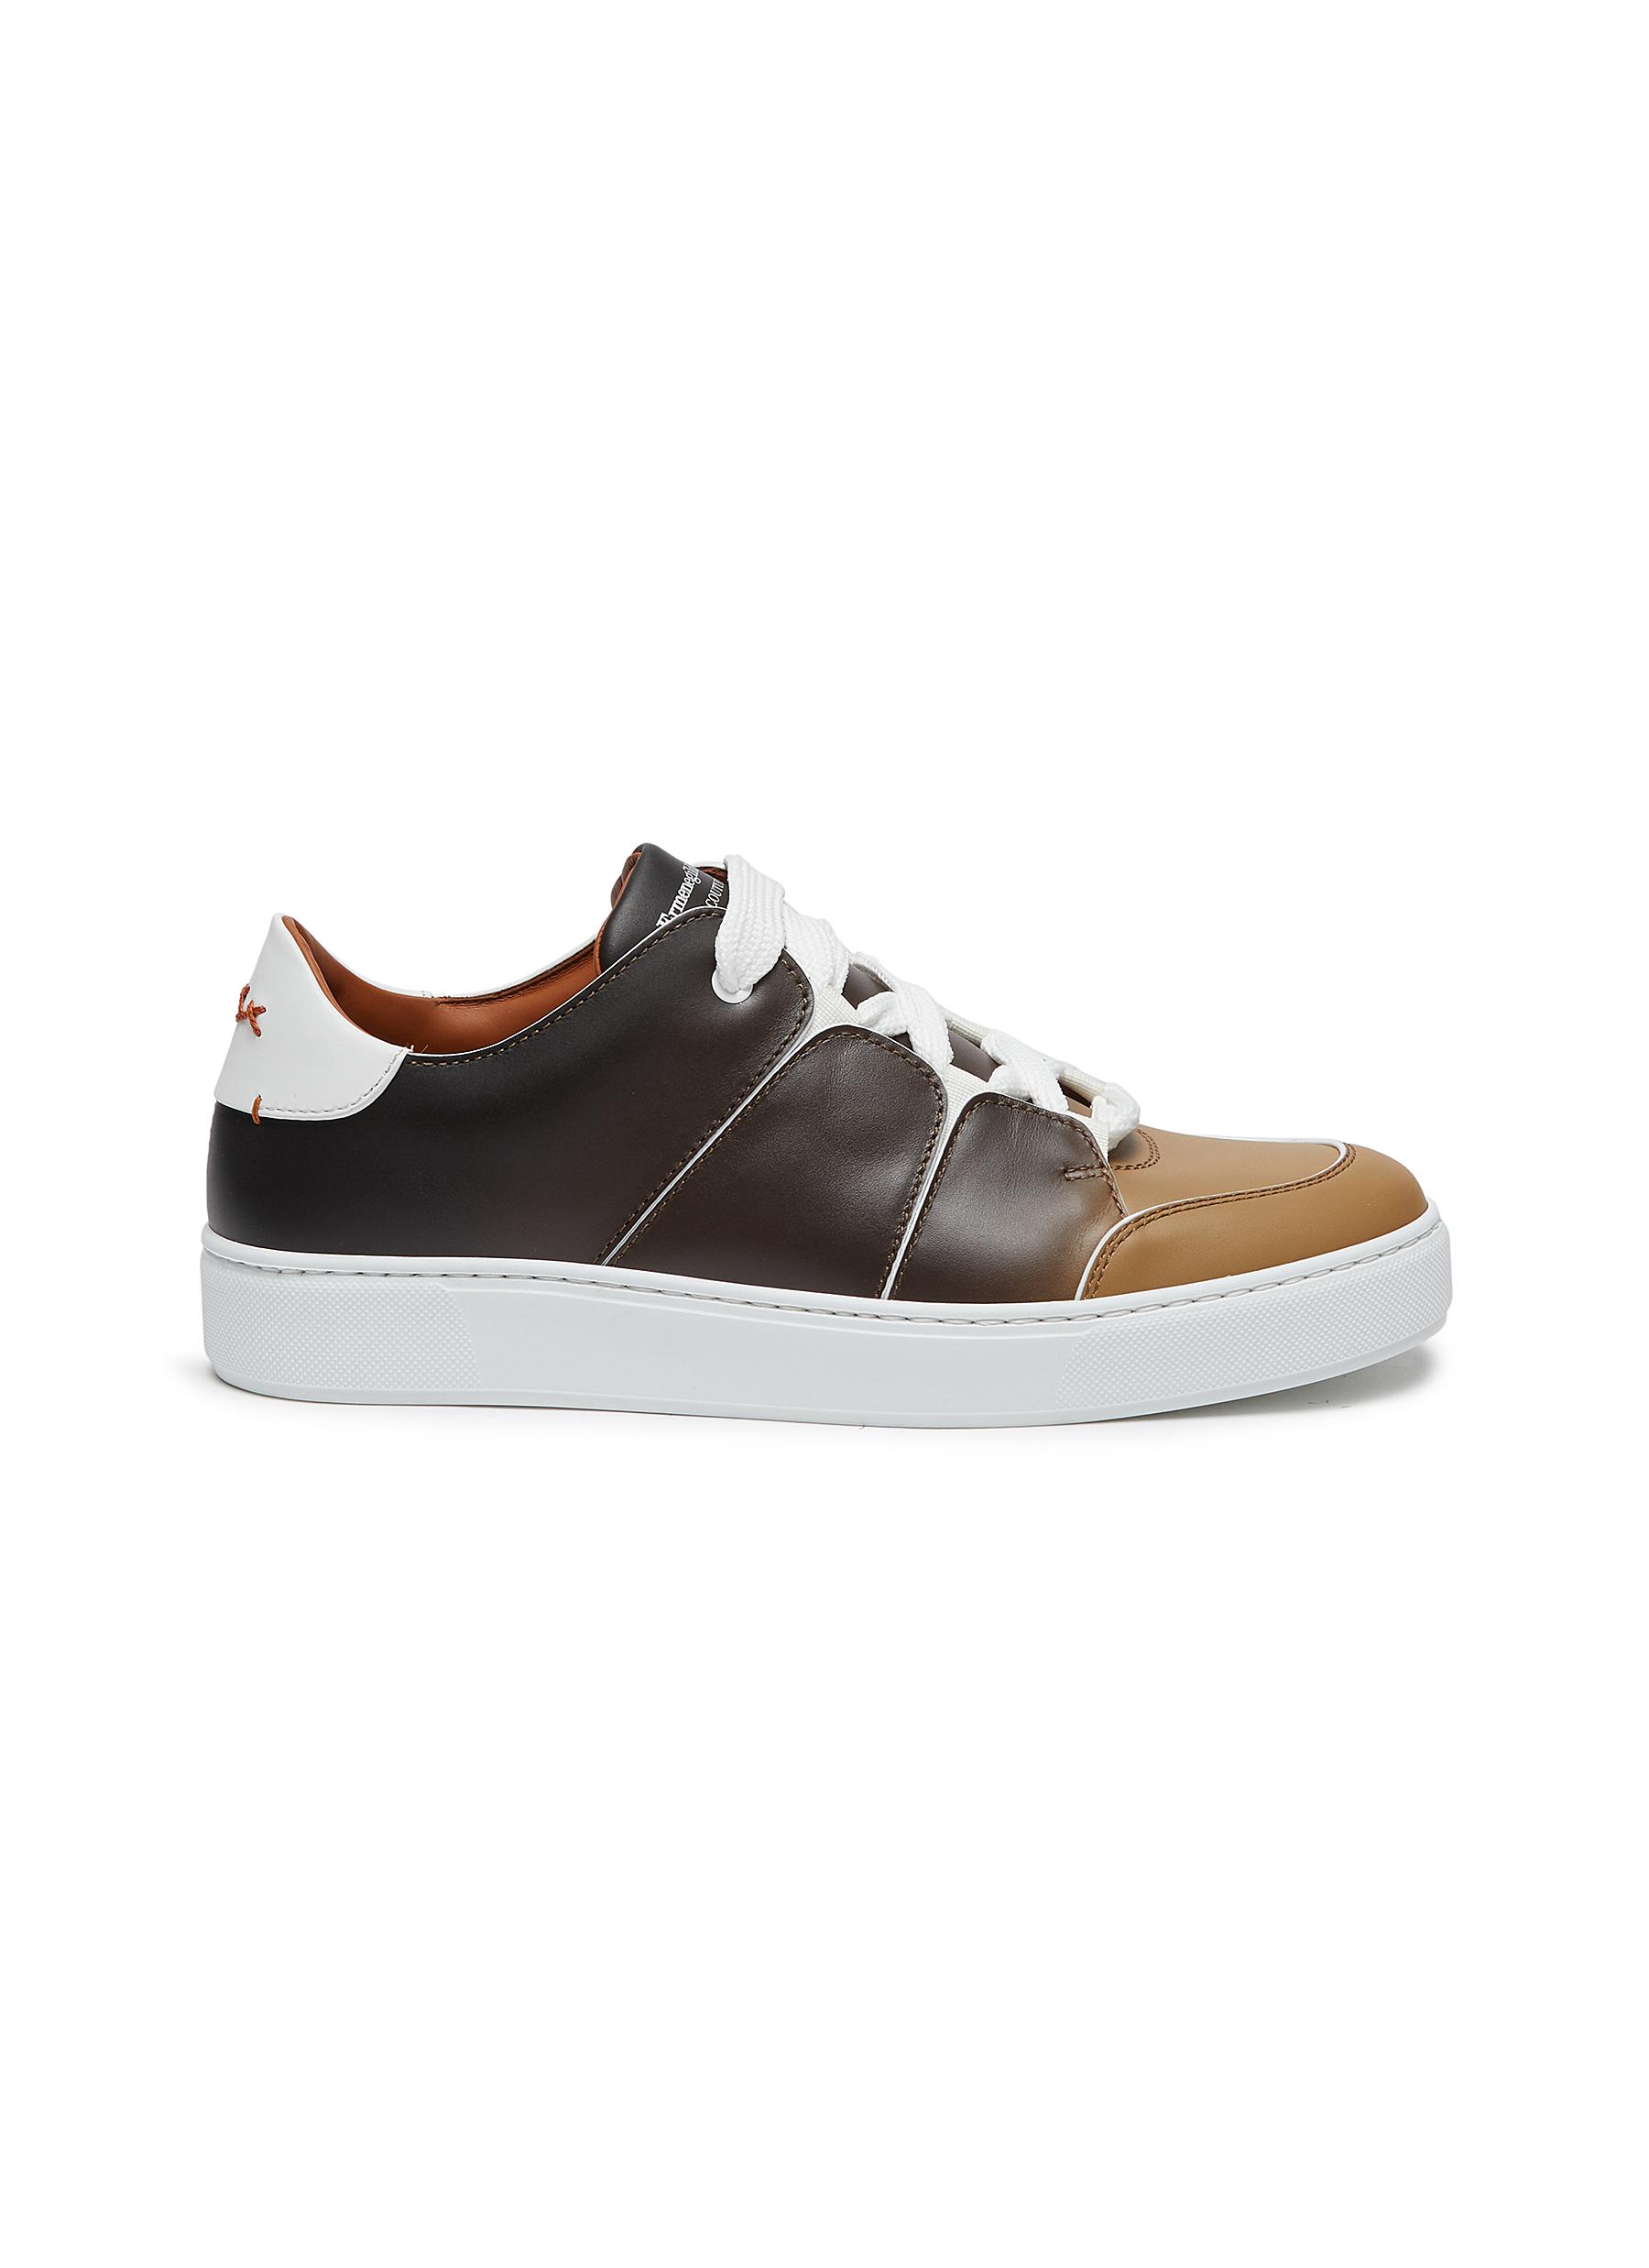 'Tiziano' Gradient Leather Overlay Low-top Sneakers